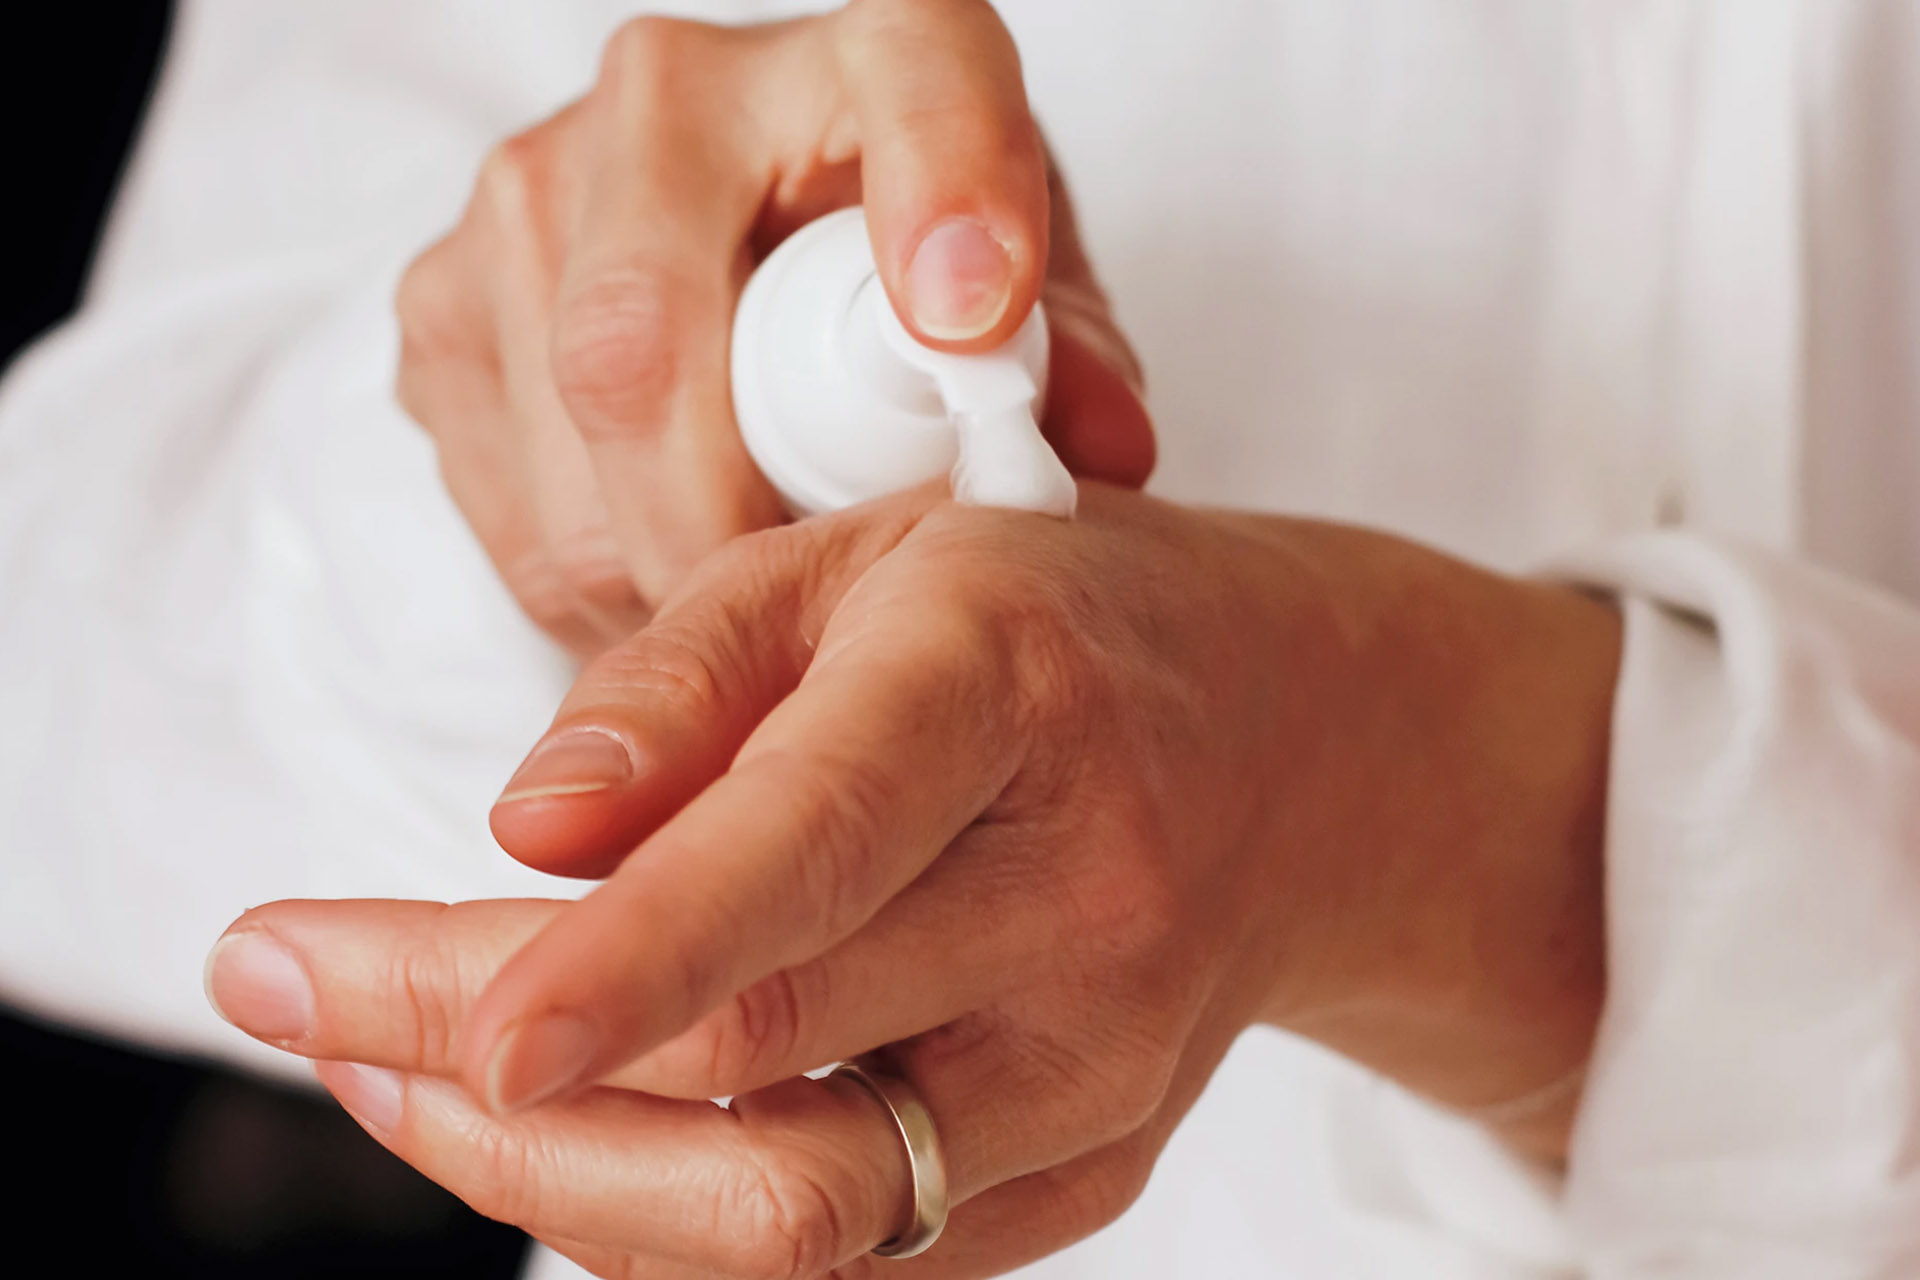  A person applying moisturizer on one hand